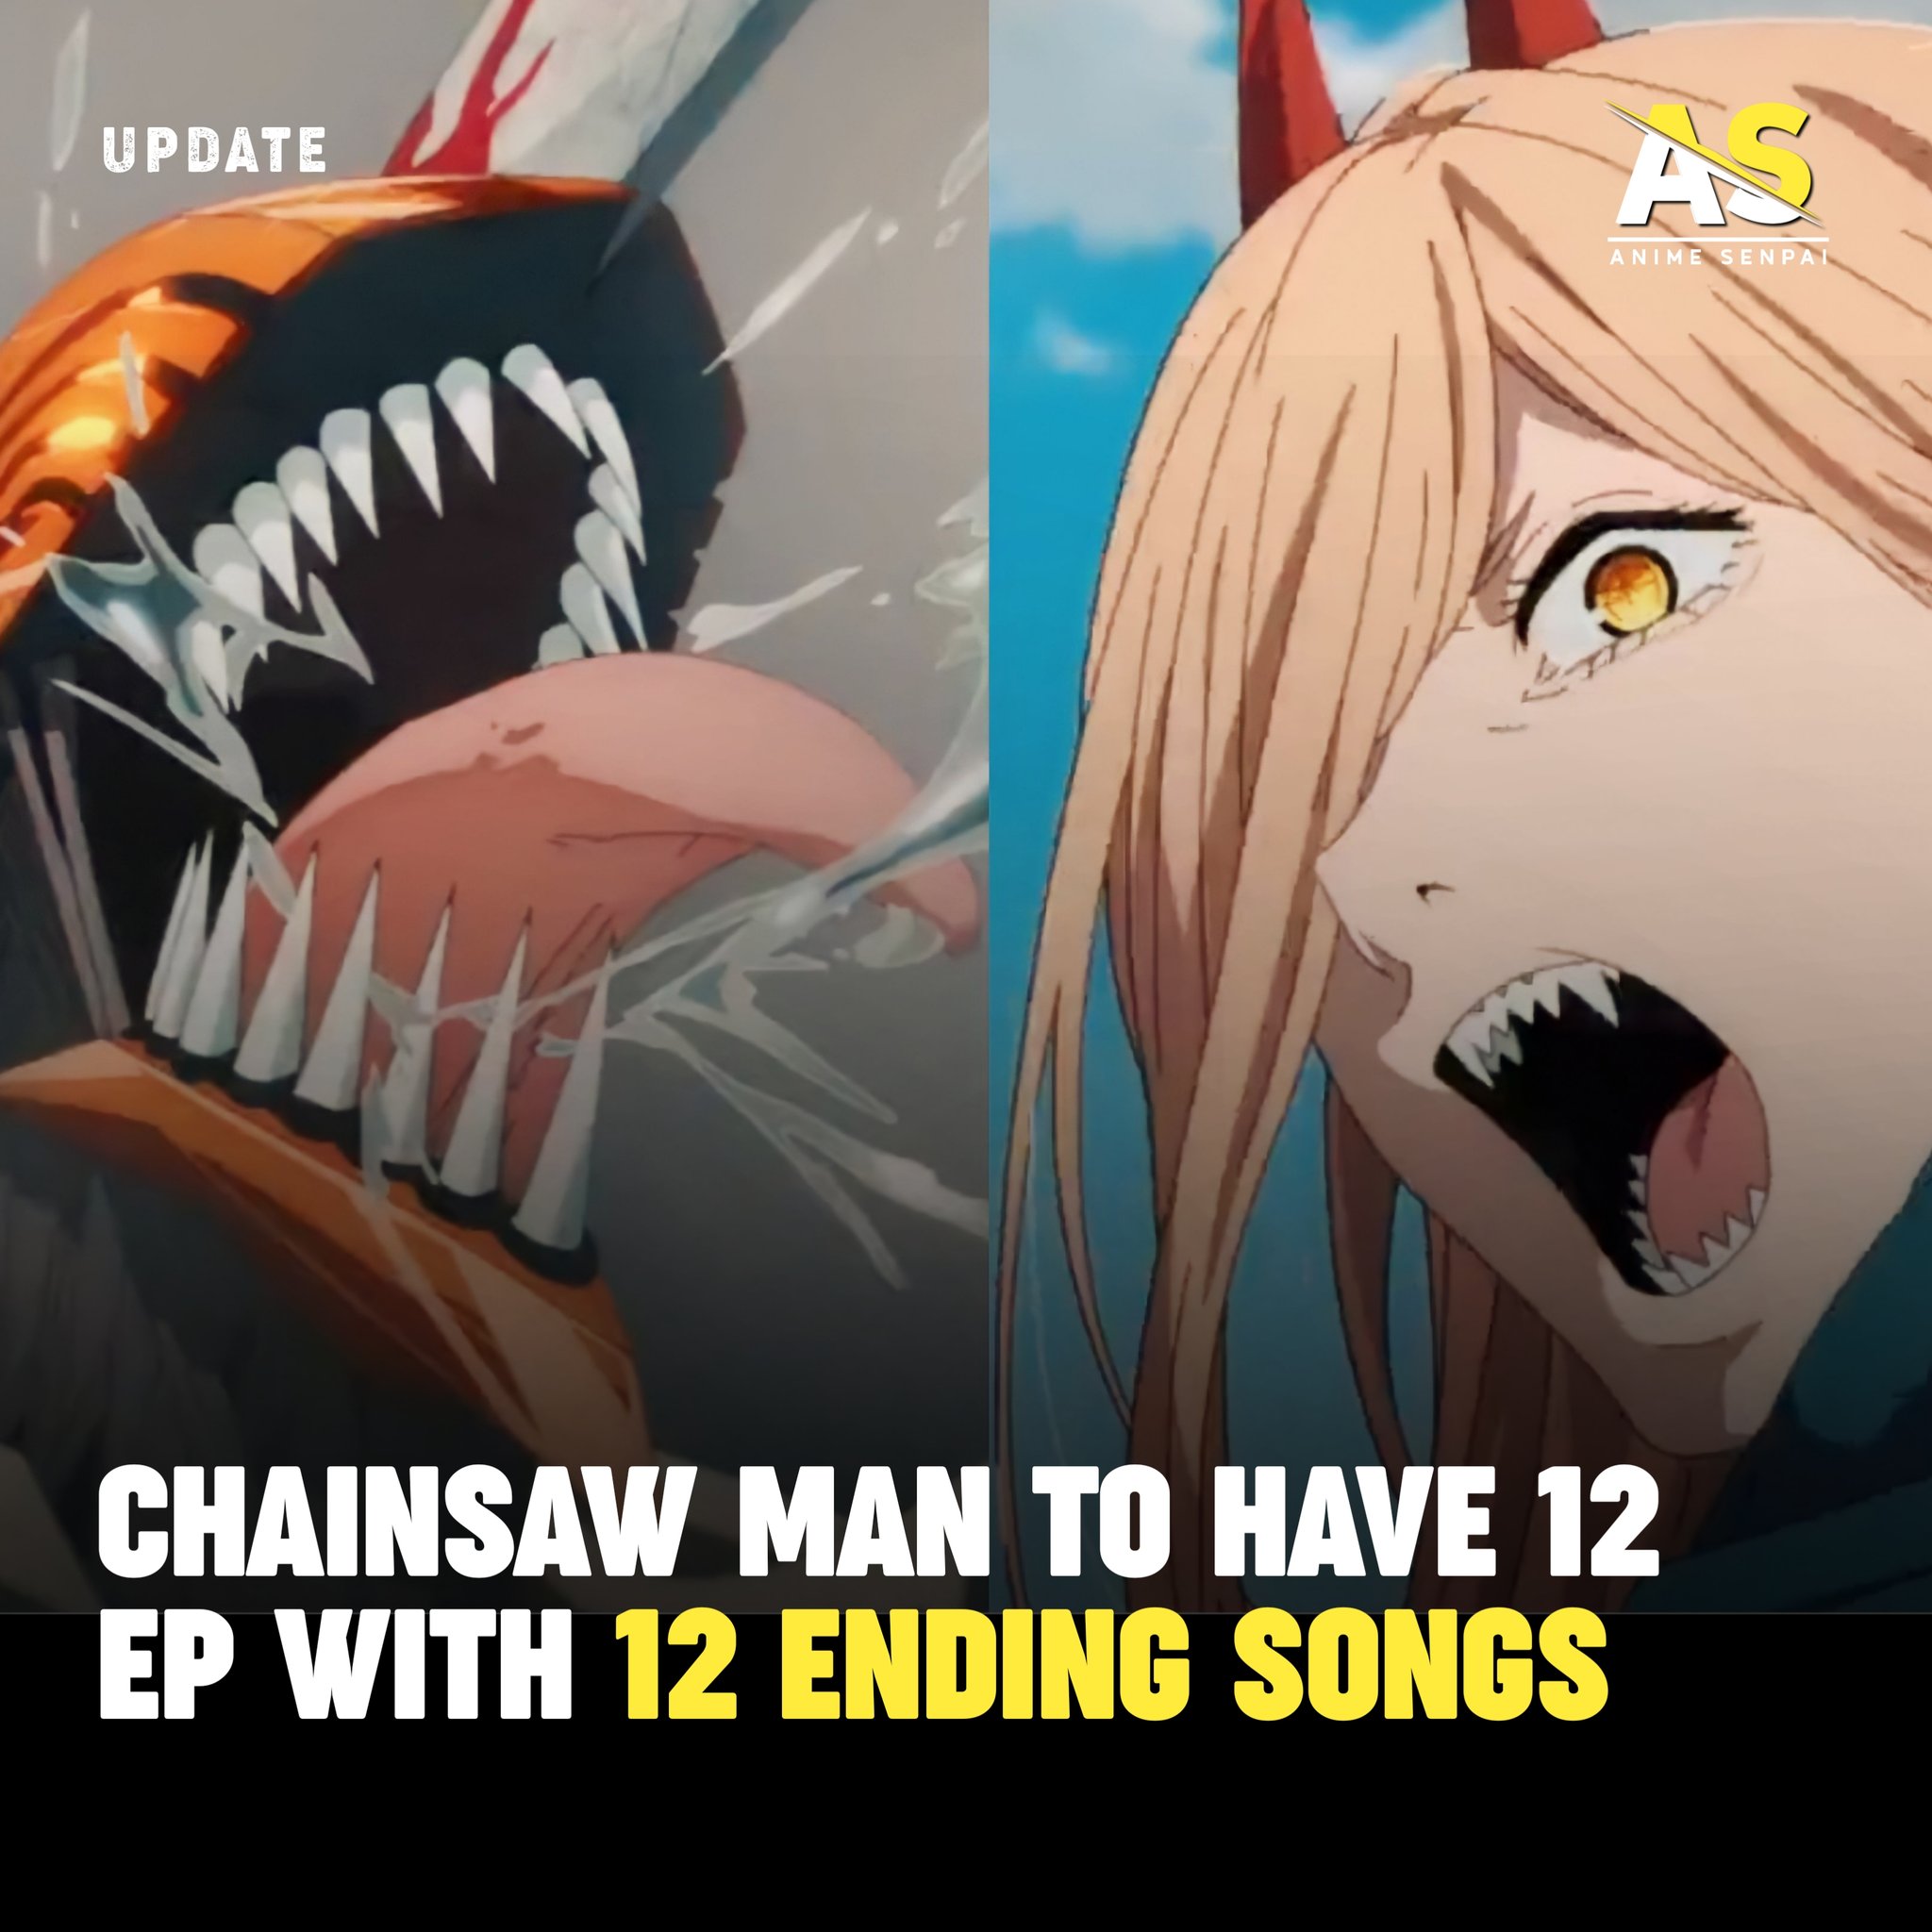 Chainsaw Man Reveals Episode 5 Ending With Song by Syudou - Anime